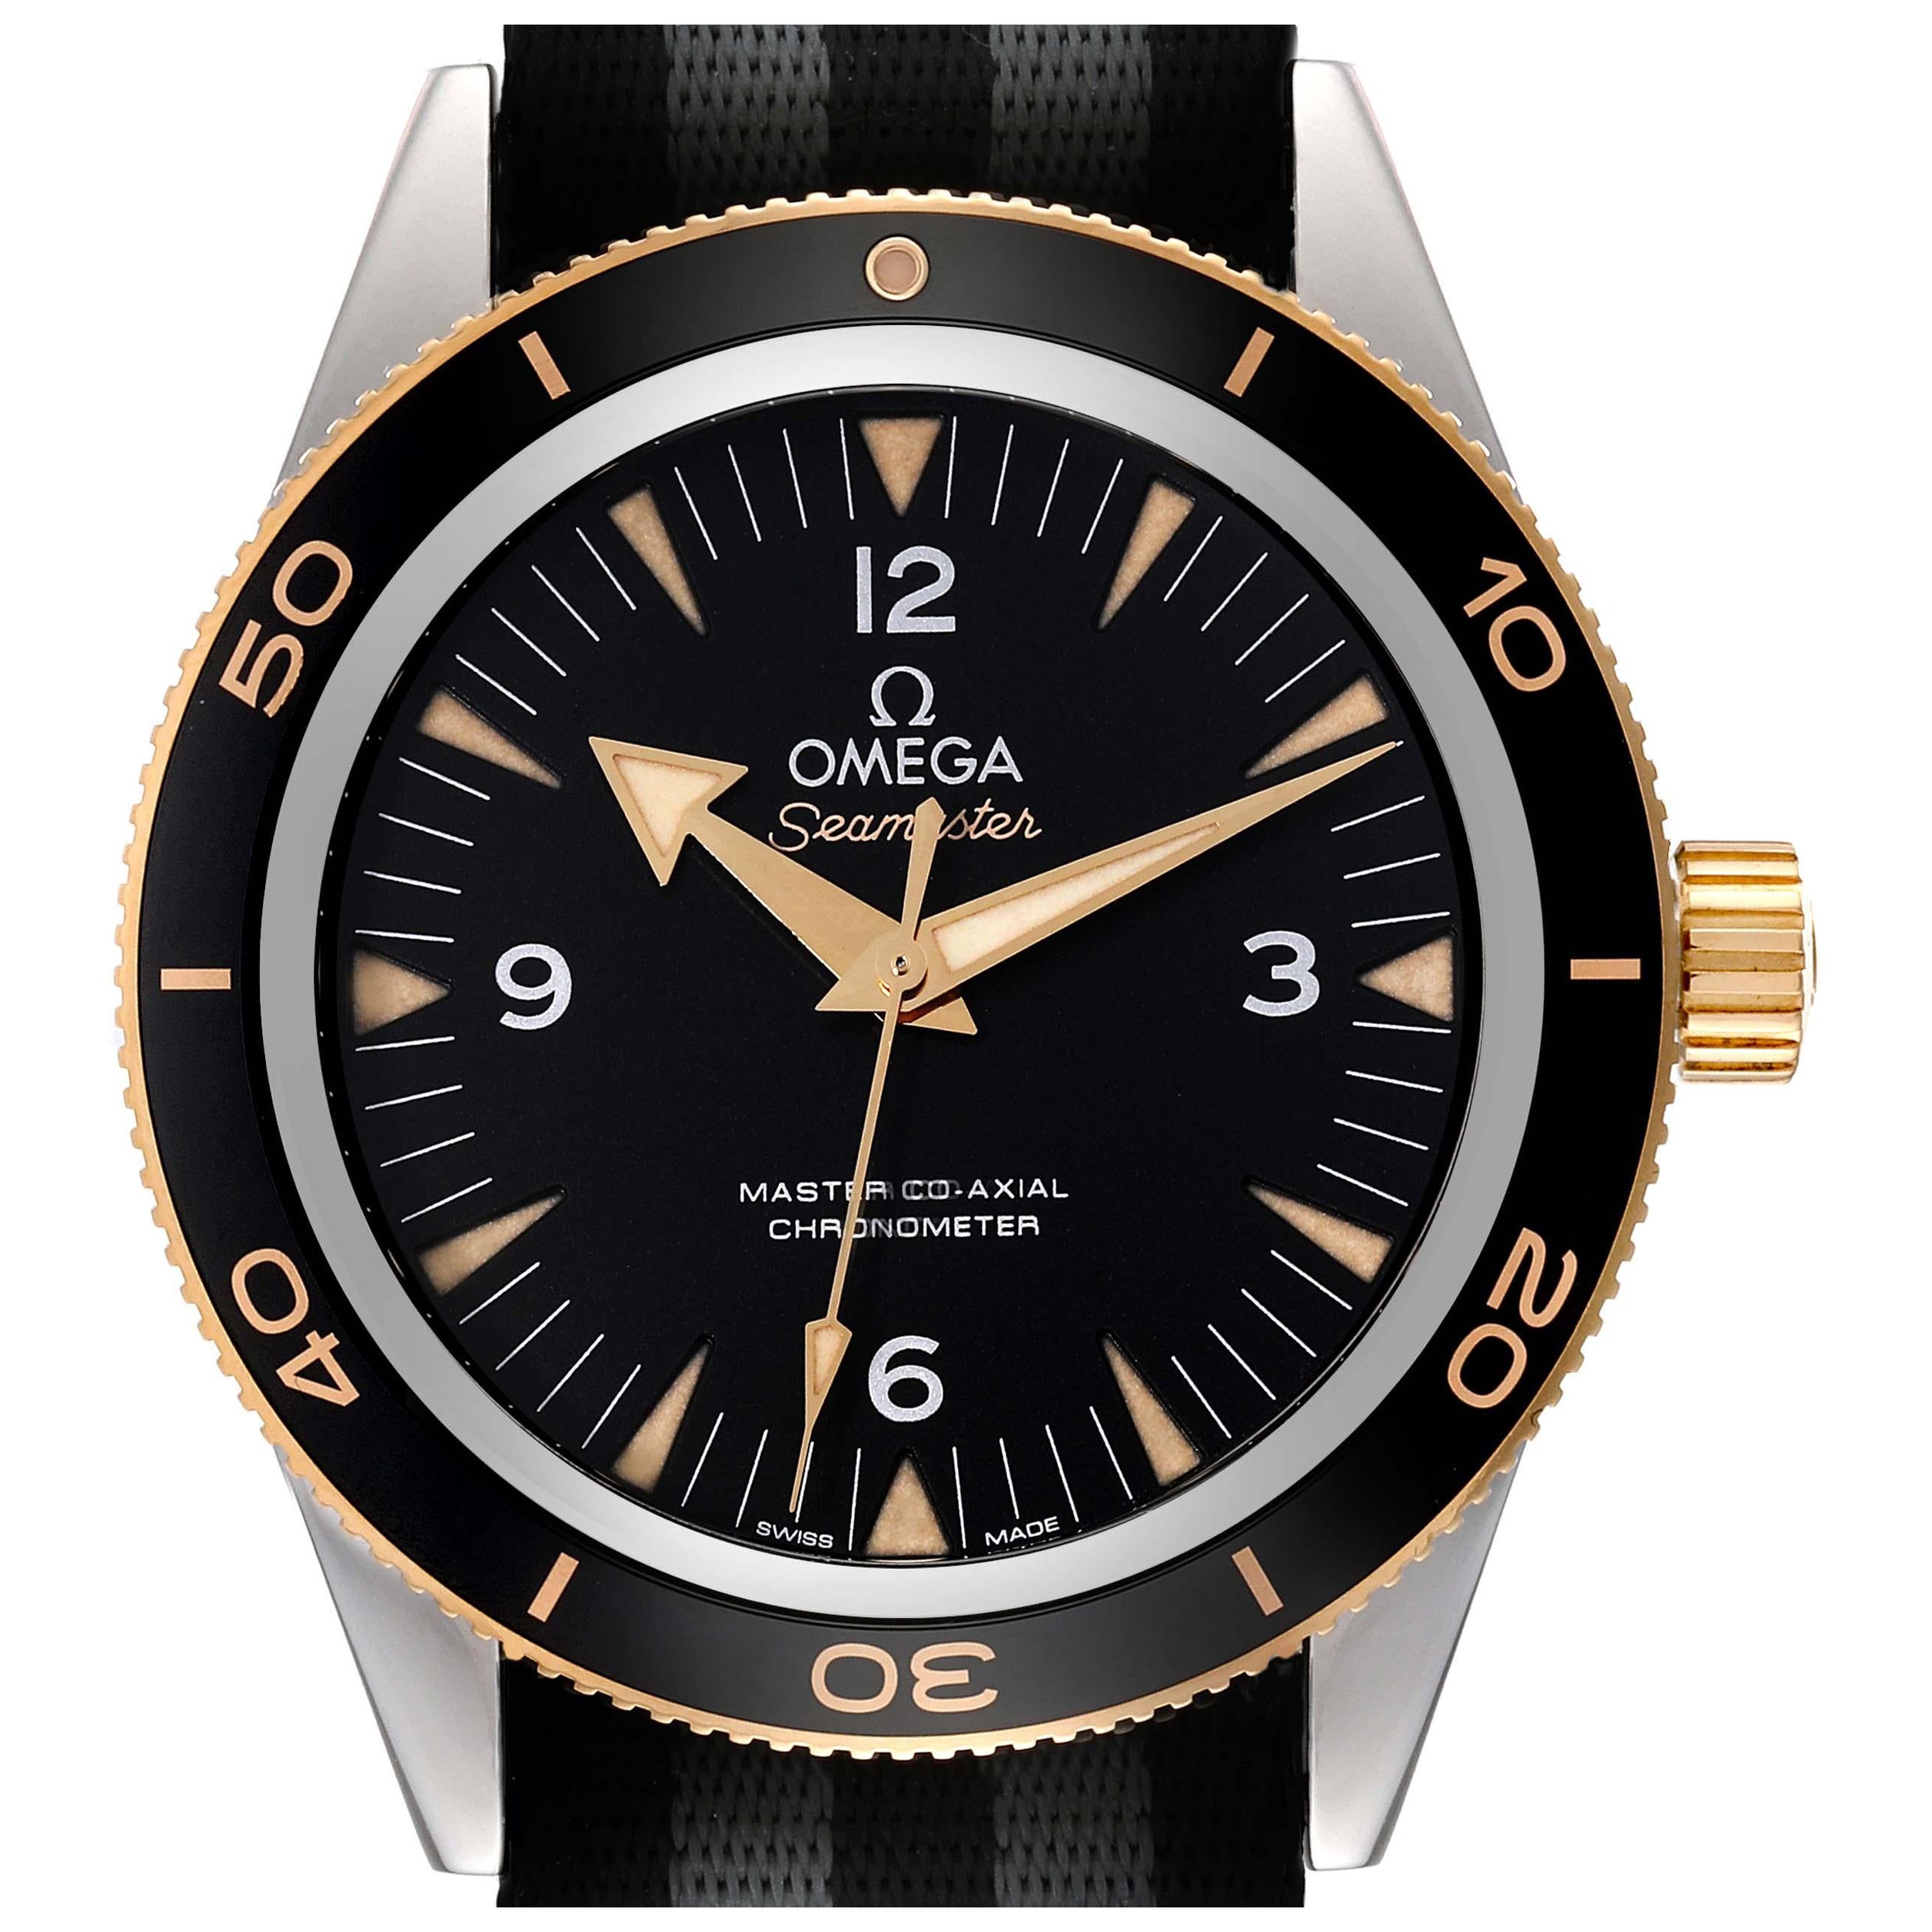 Omega Seamaster 300M Steel Yellow Gold Mens Watch 233.22.41.21.01.001 For Sale